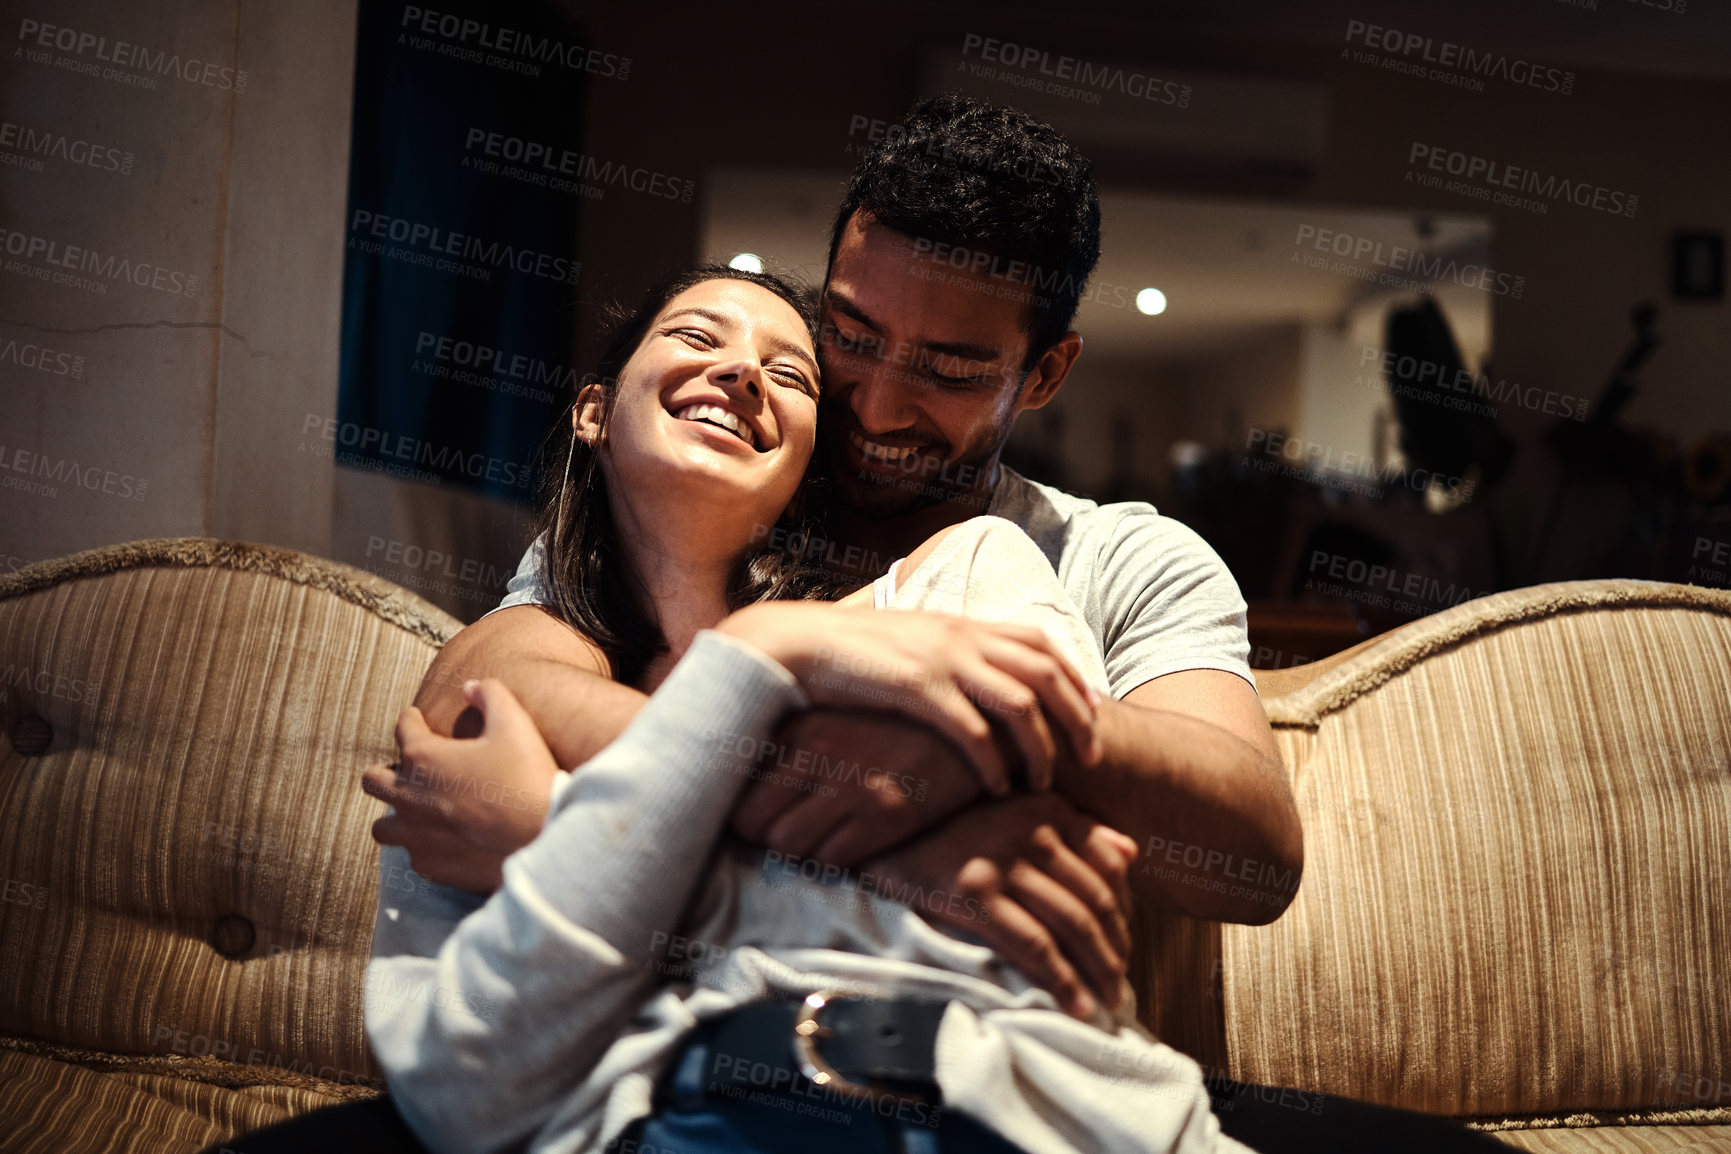 Buy stock photo Shot of an affectionate couple spending quality time together at home